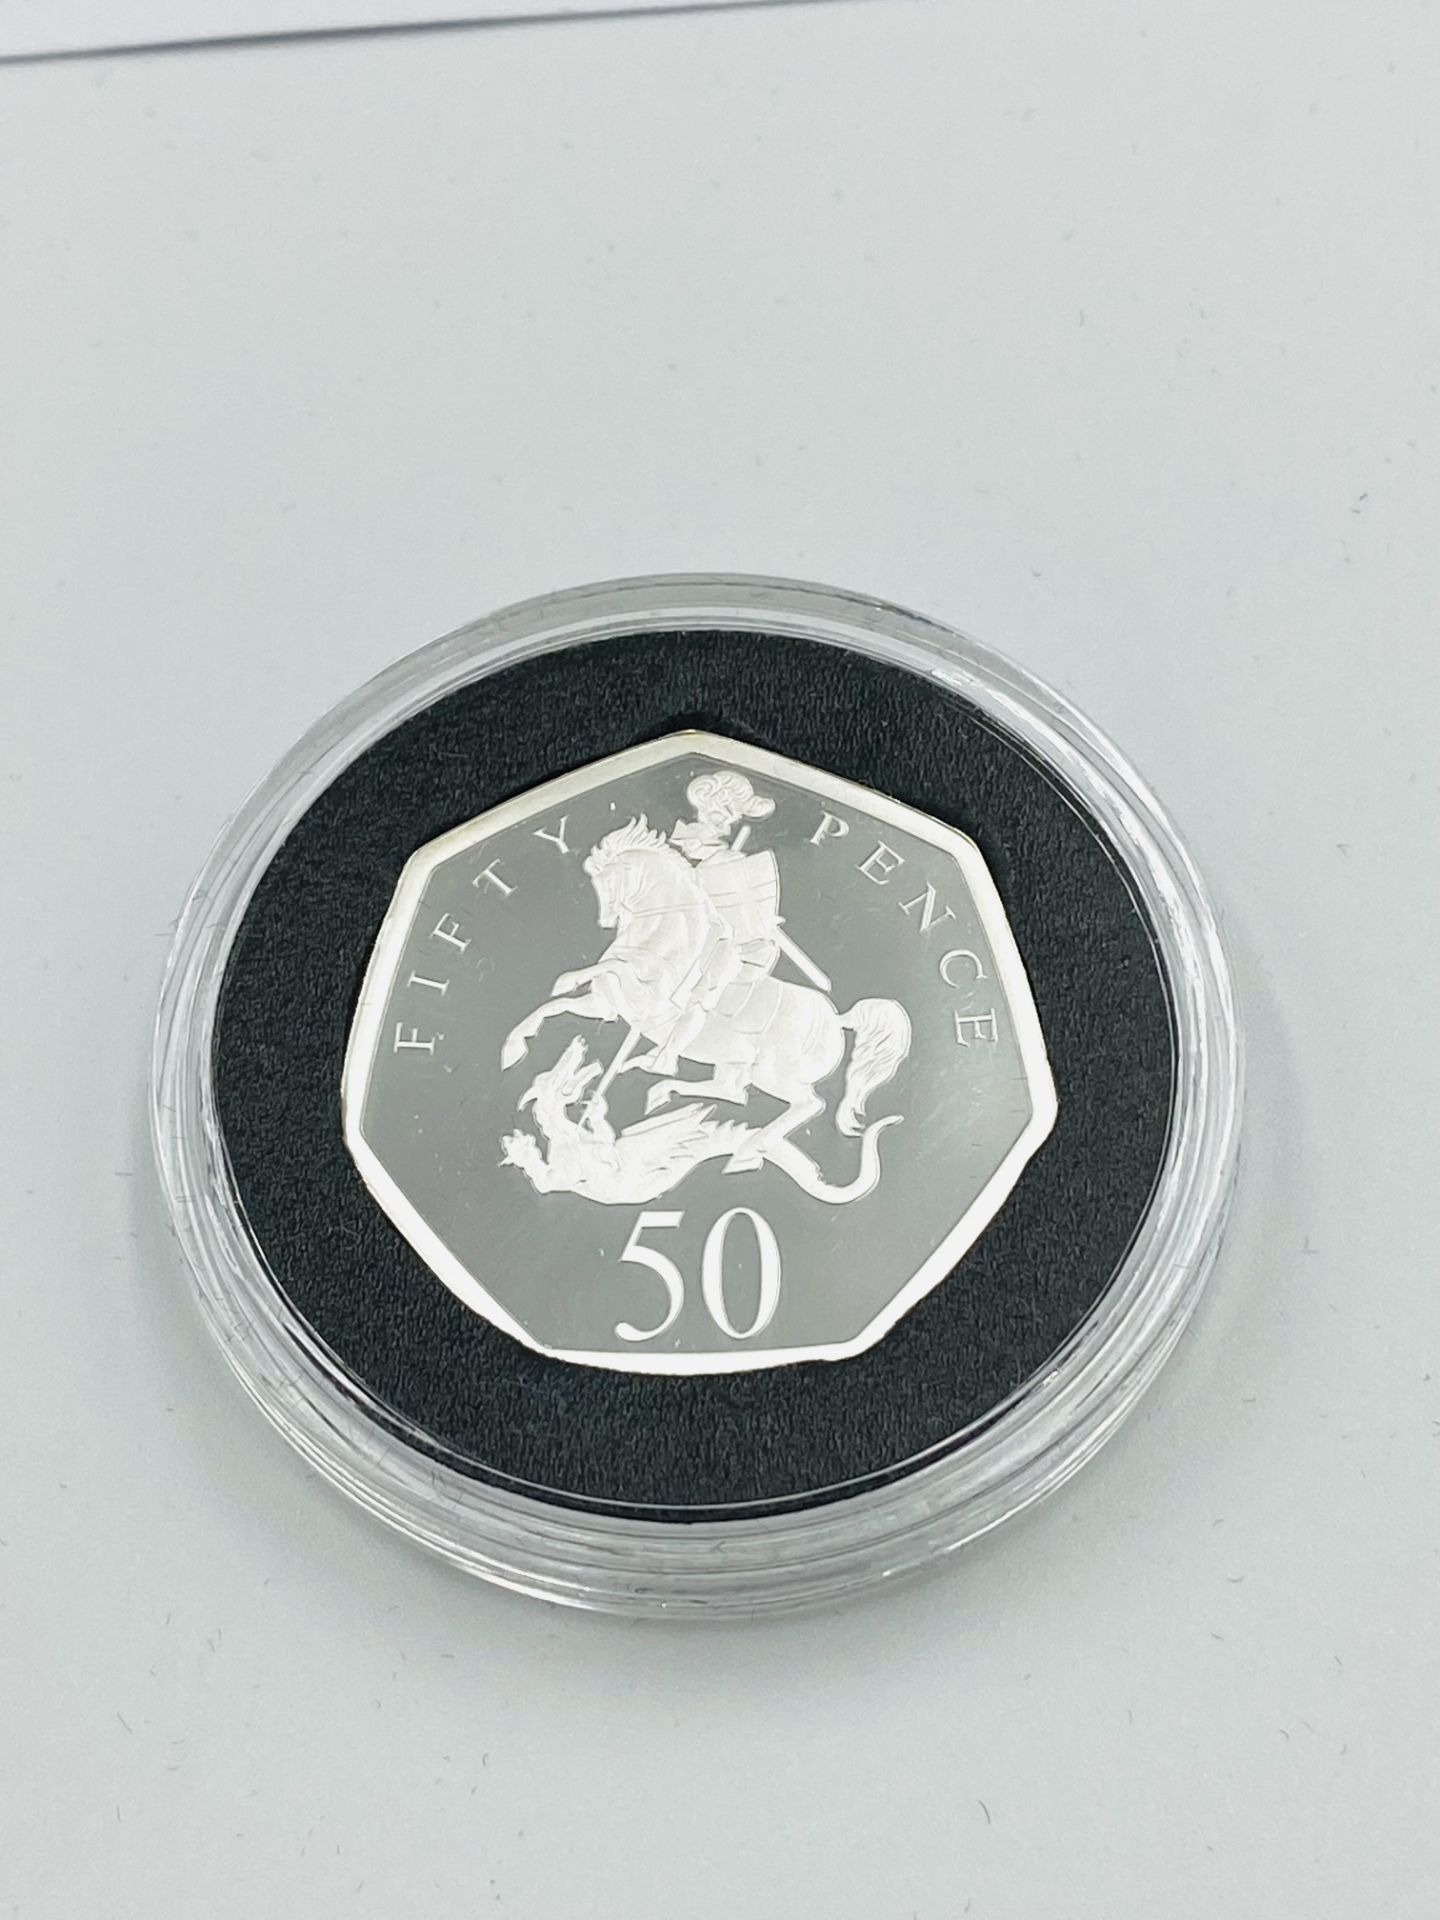 Jubilee Mint 50th Anniversary of Decimalisation fine silver proof coin collection - Image 3 of 6